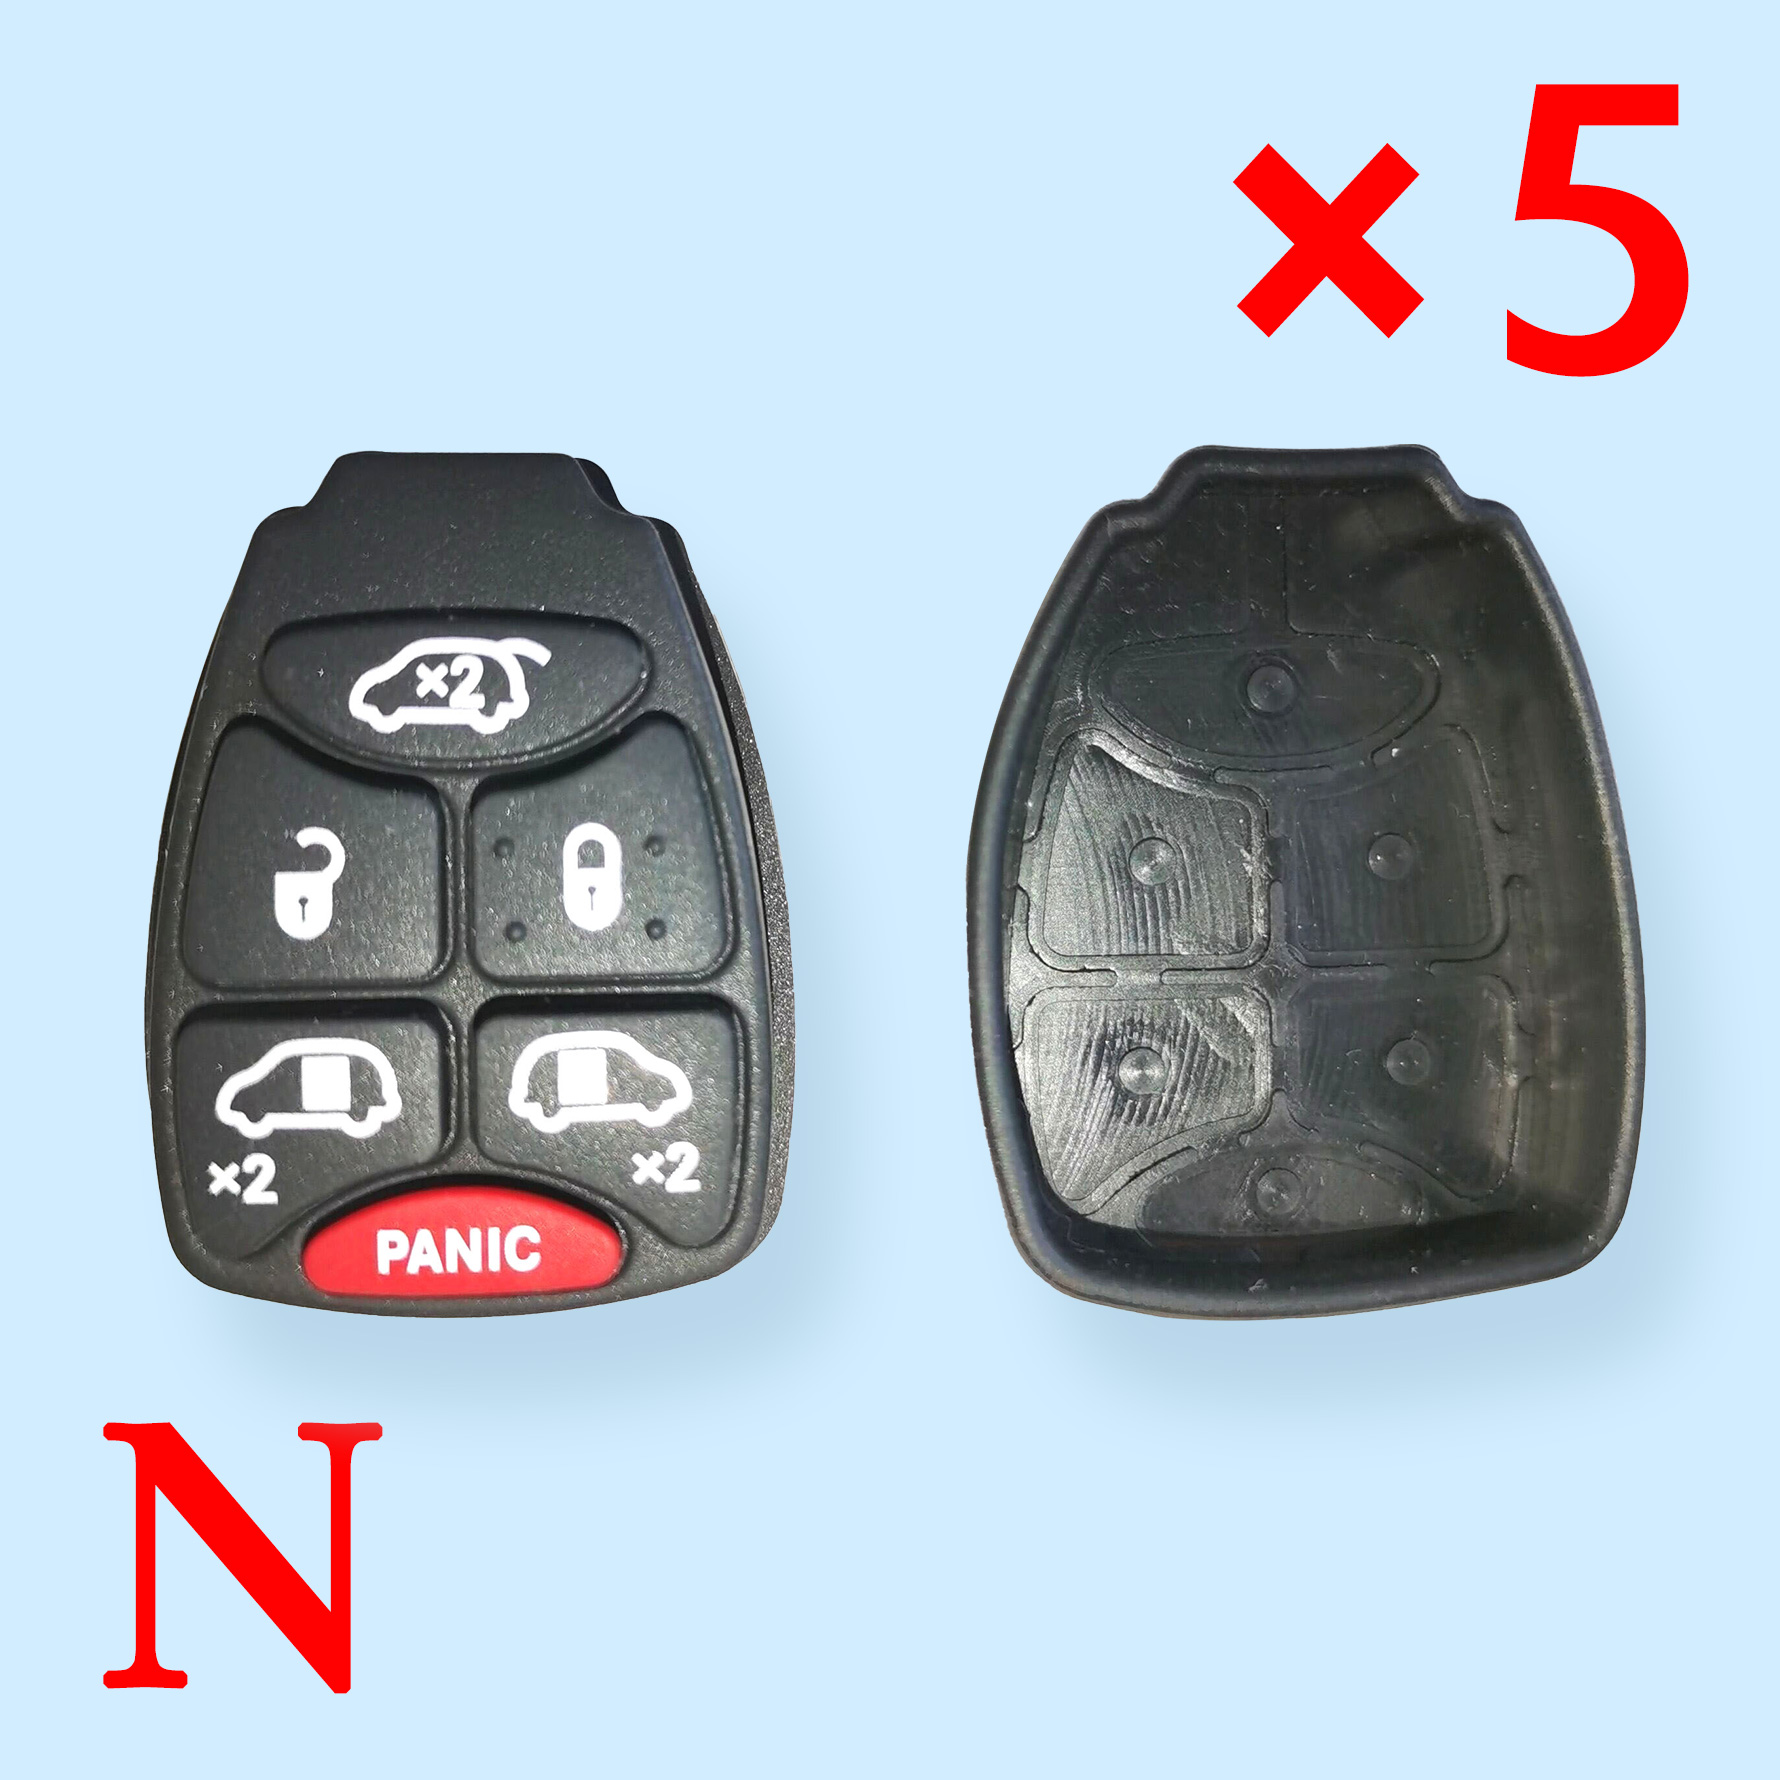 6 Buttons Remote Rubber for Chrysler (5pcs)